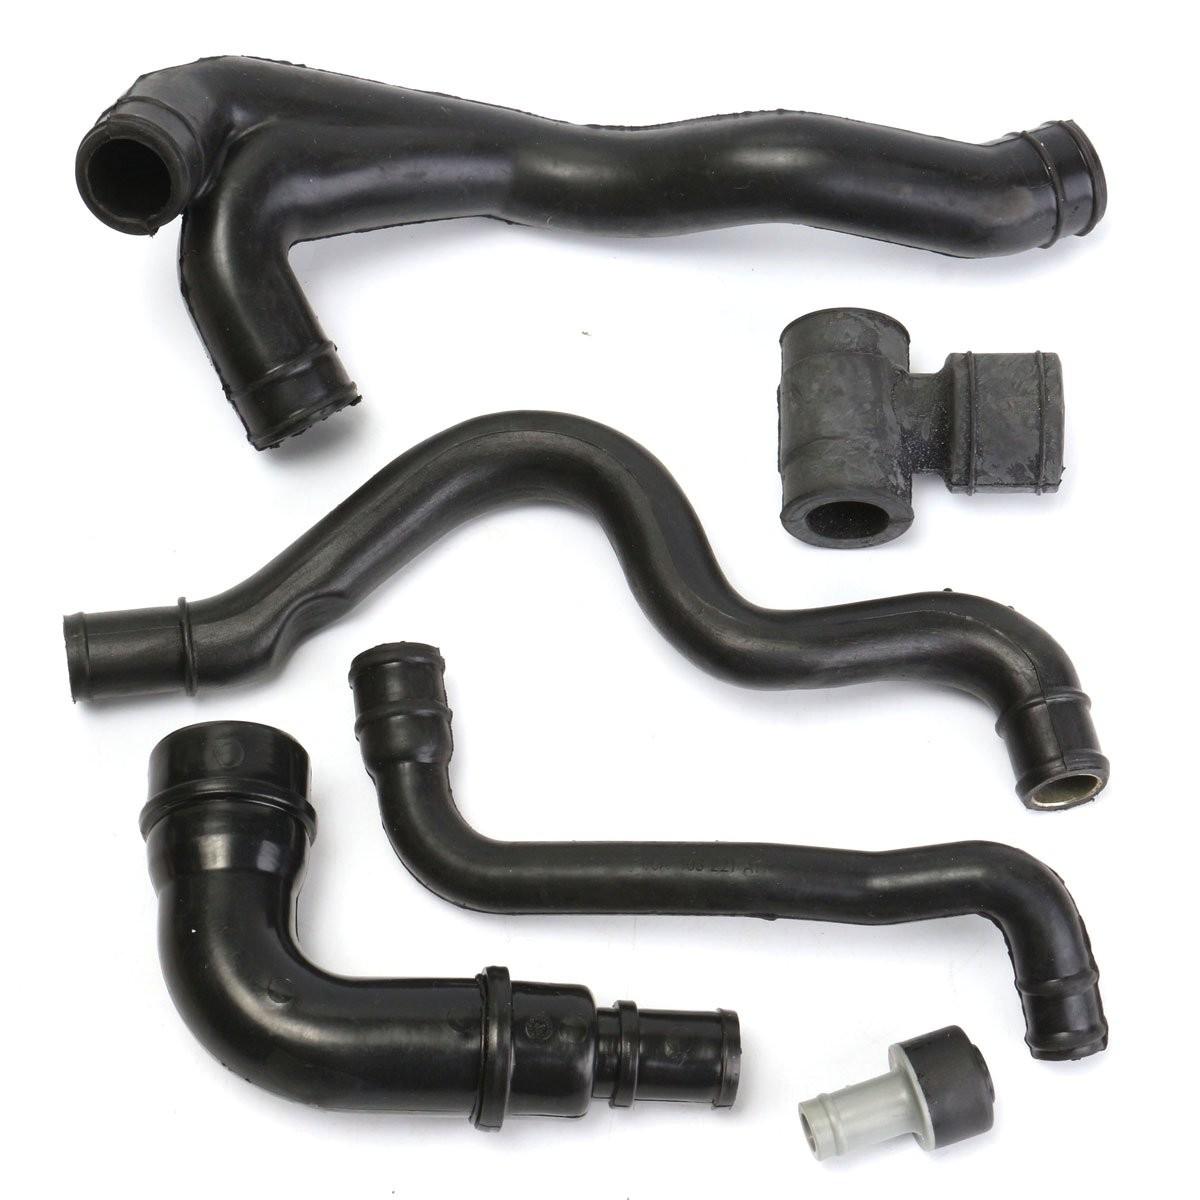 Engine Crankcase Breather Pipes Kit For Jetta Golf MK4